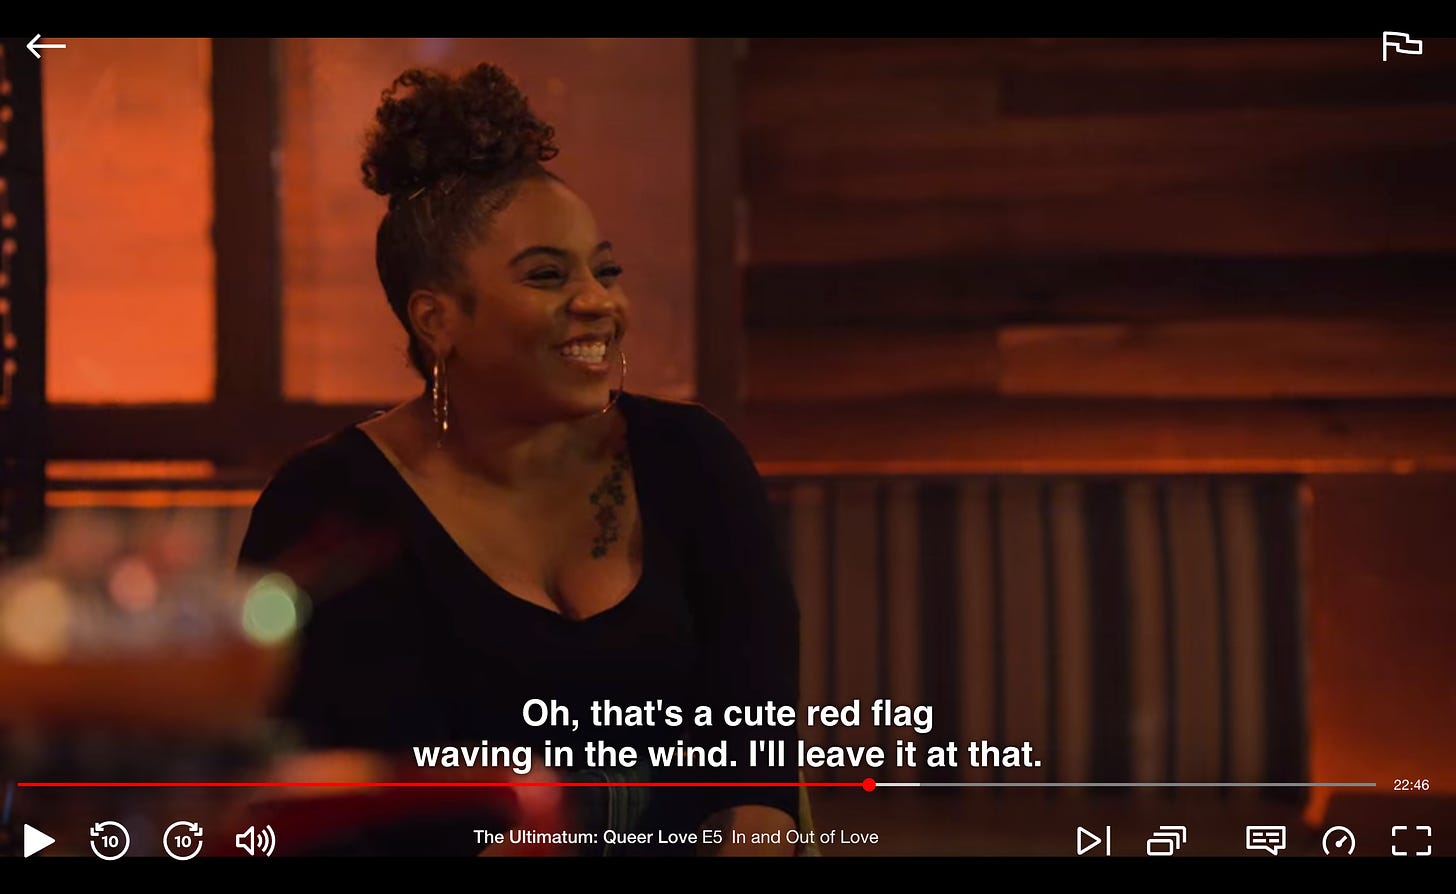 A screenshot of the Netflix reality show The Ultimatum: Queer Love. A Black woman is sitting in a bar and smiling with gritted teeth. Below her is her dialogue: "Oh, that's a cute red flag waving in the wind. I'll leave it at that."